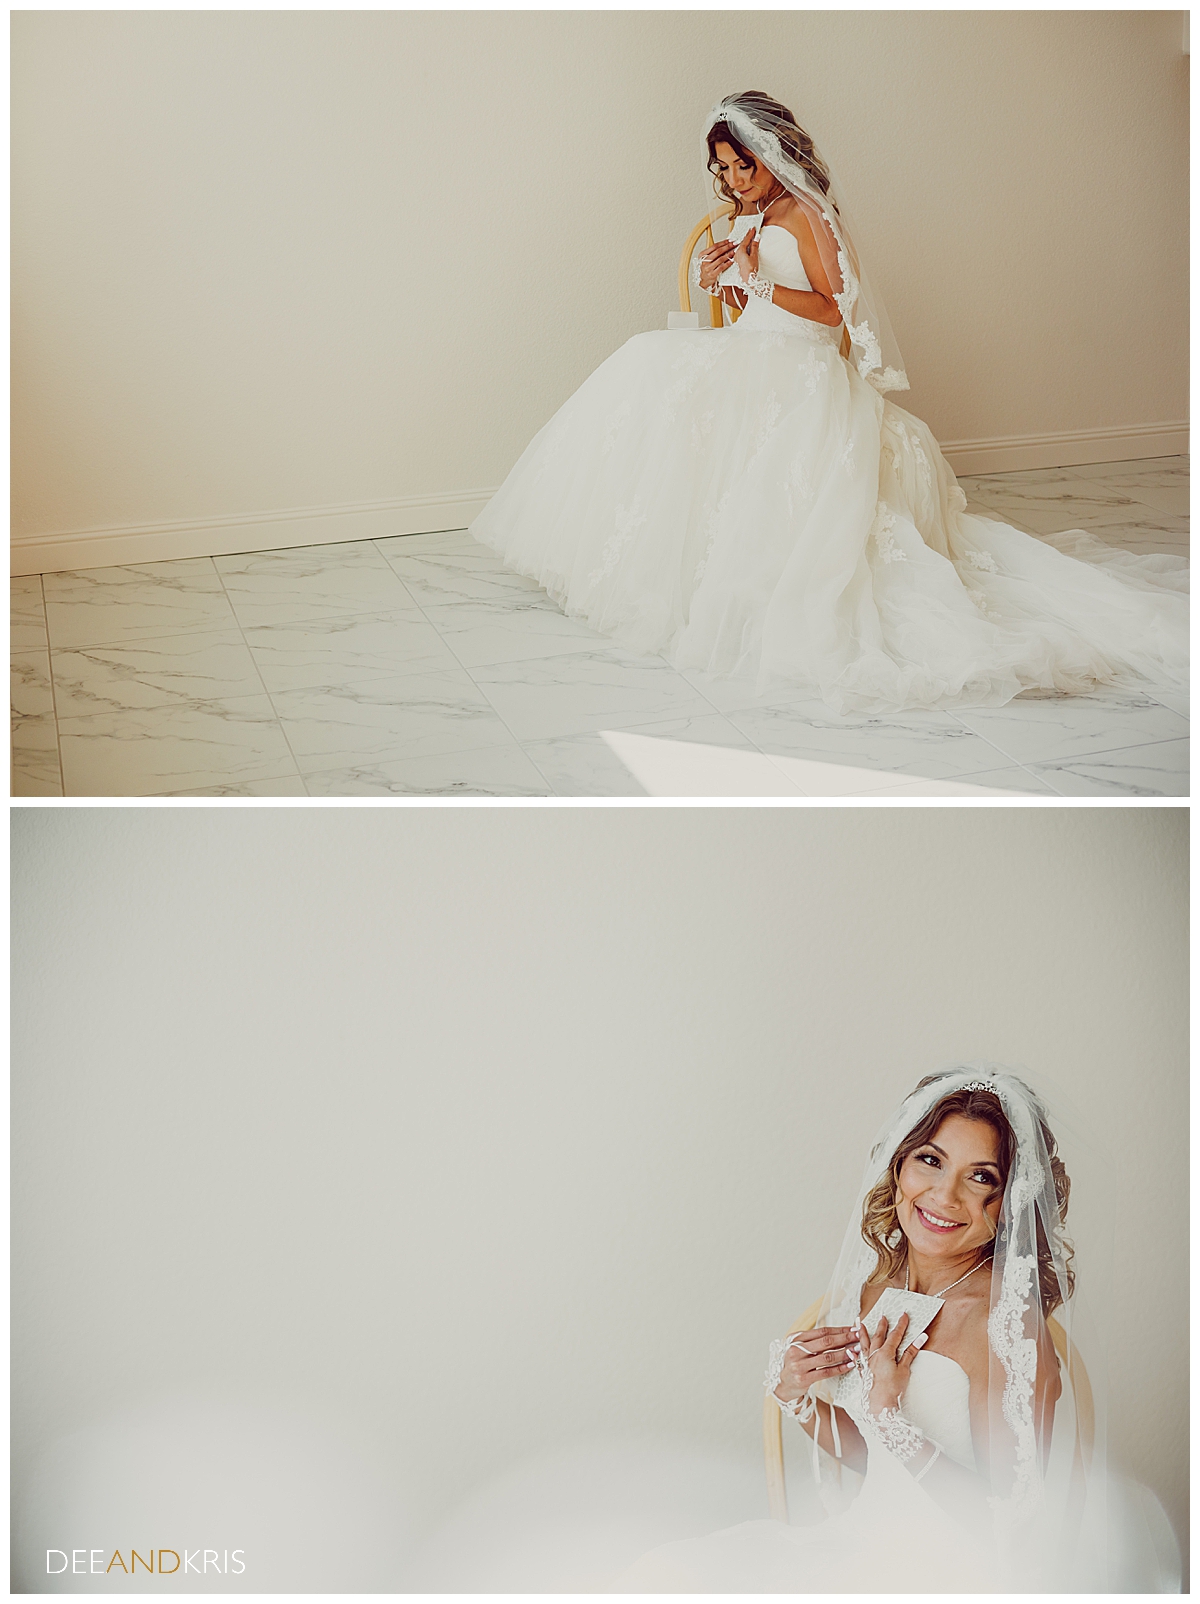 Two images: Top image of bride sitting in a chair holding groom's letter to her chest and looking down. Bottom image of bride looking to side and smiling while holding letter to her heart.